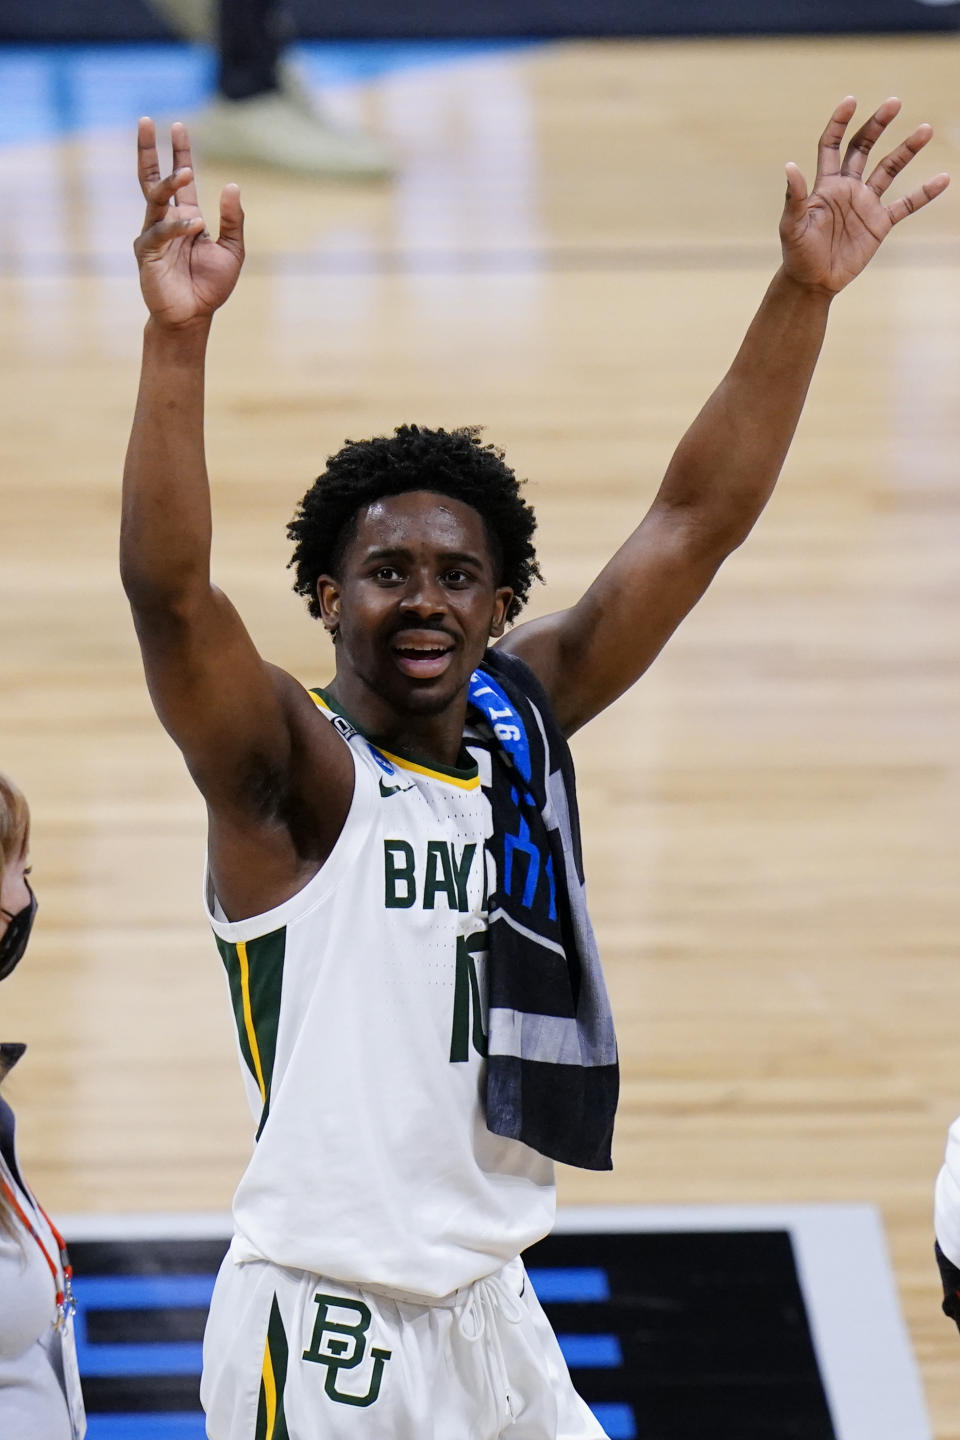 Baylor guard Adam Flagler (10) waves to fans after beating Villanova 62-51 in a Sweet 16 game in the NCAA men's college basketball tournament at Hinkle Fieldhouse in Indianapolis, Saturday, March 27, 2021. (AP Photo/AJ Mast)